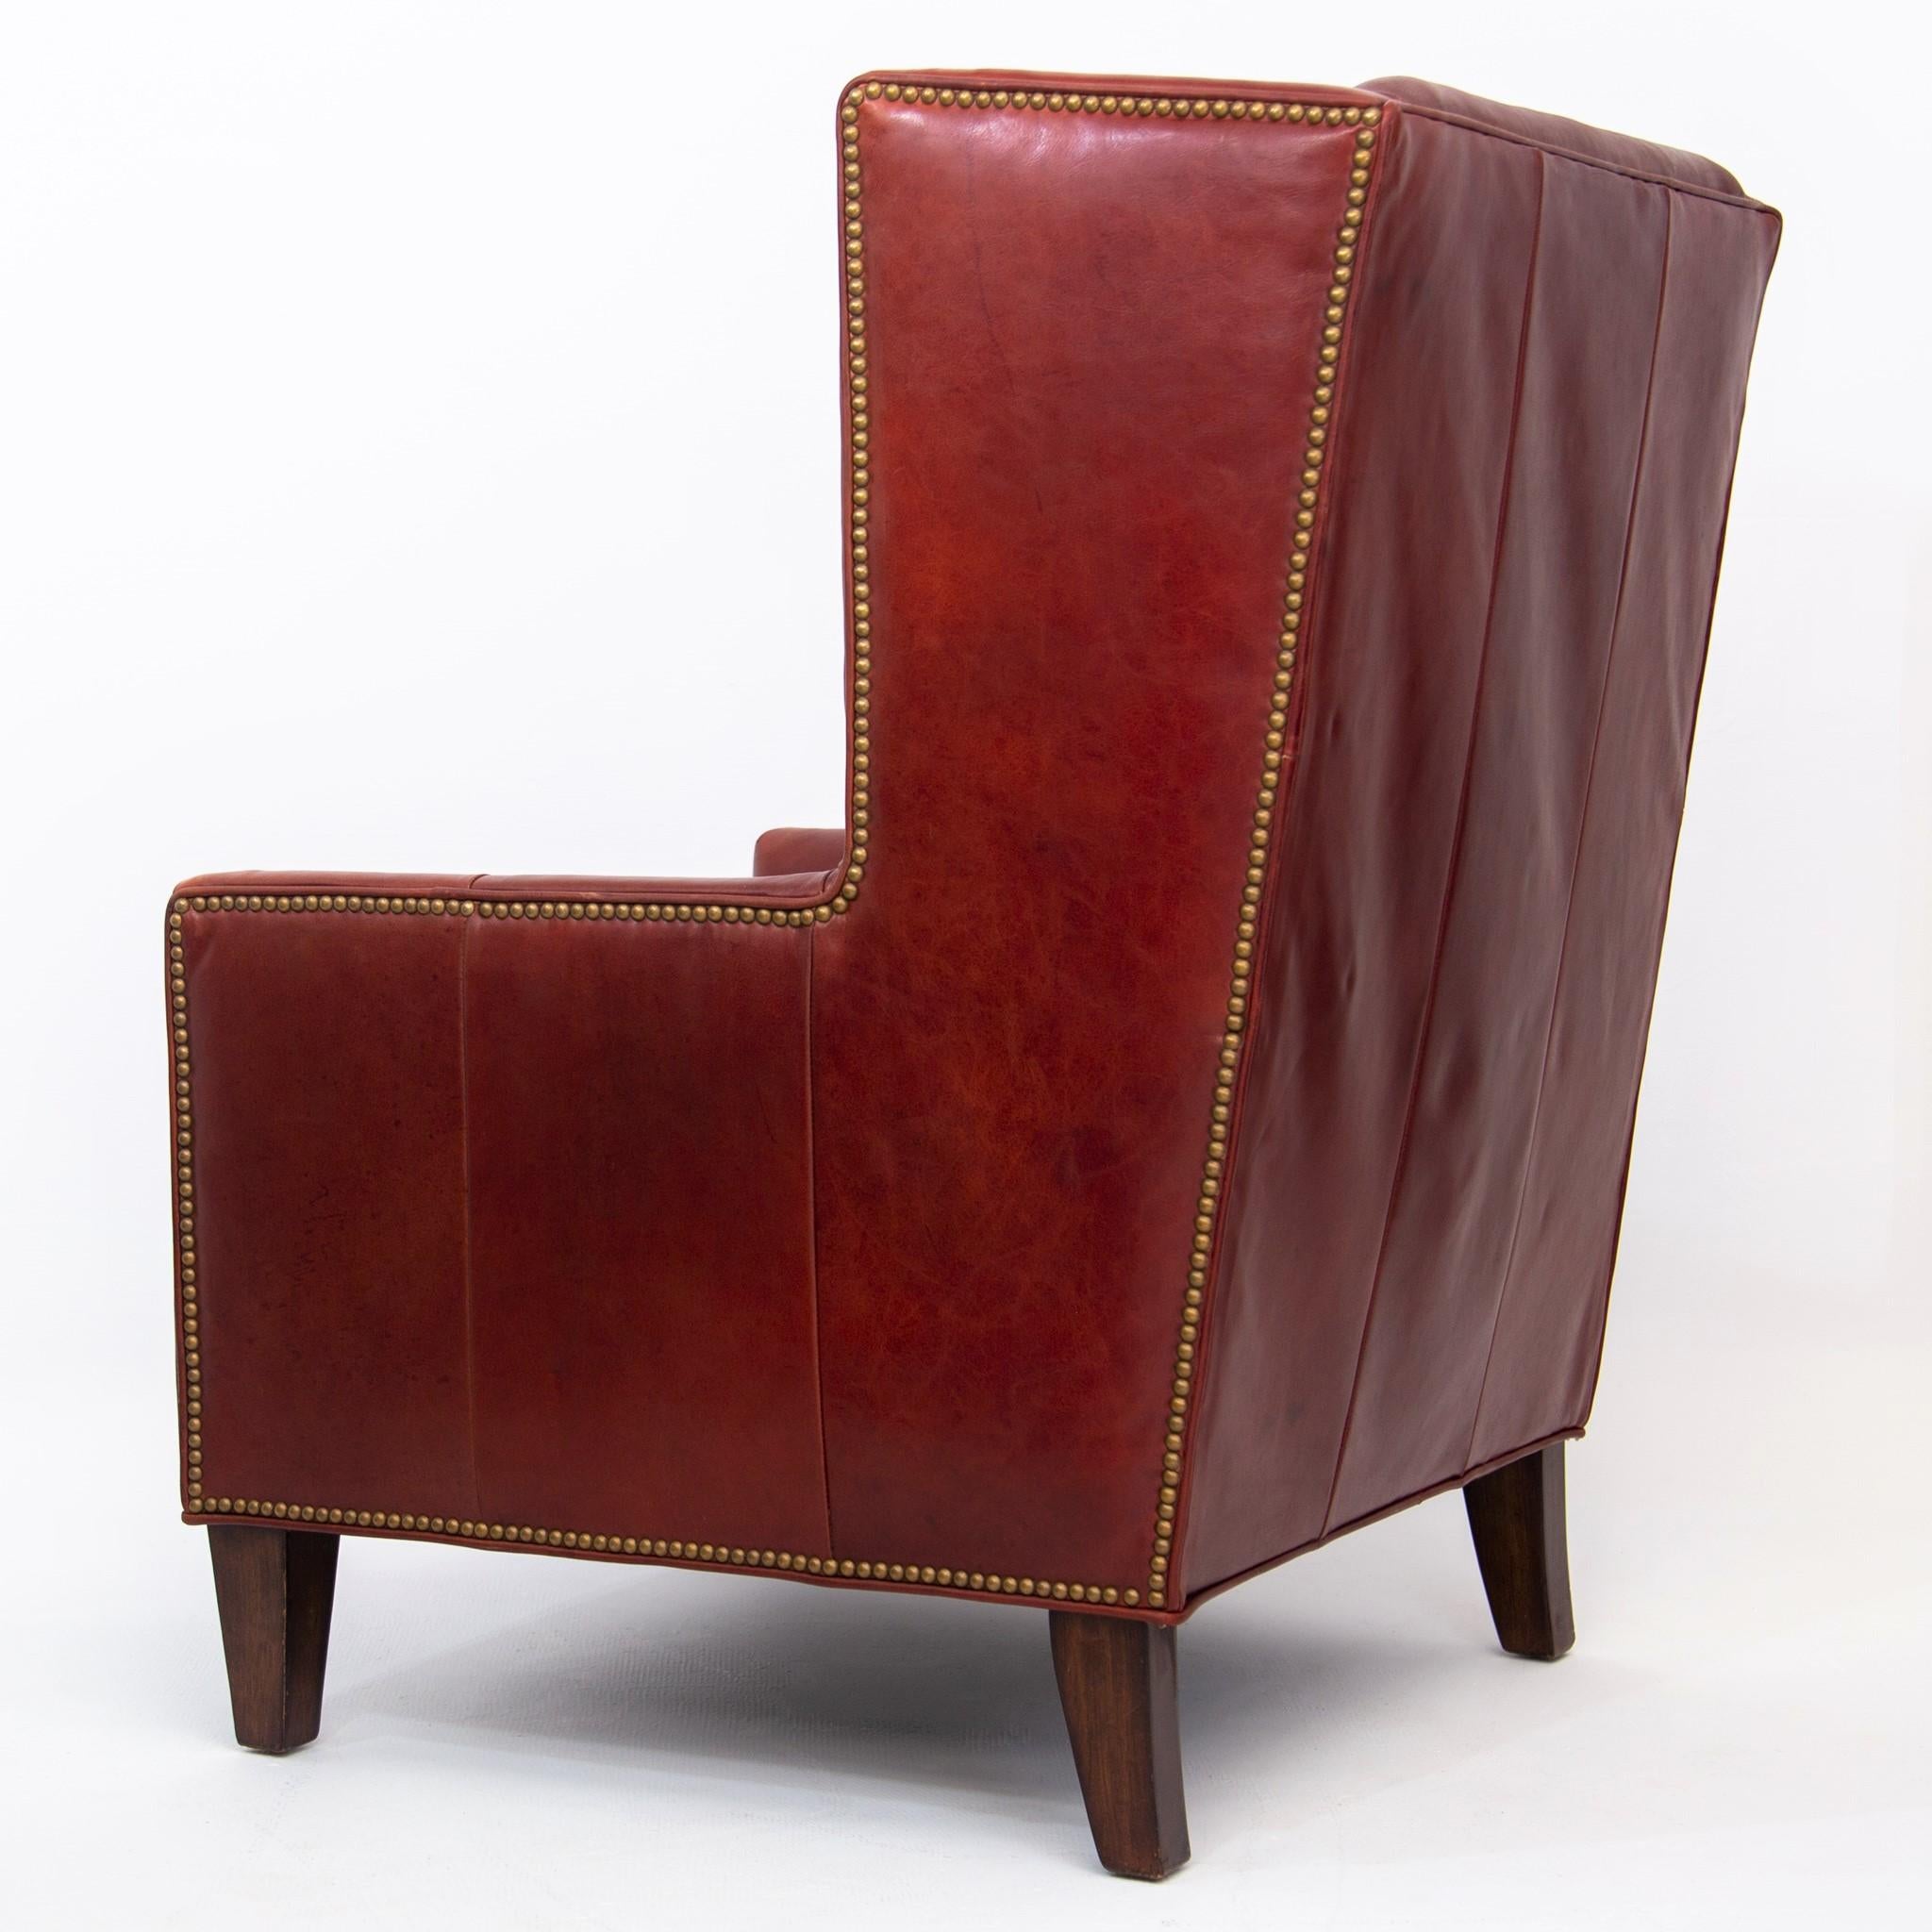 North American Deep Red Leather Wingback Fireside Chair with Brass Nailhead Trim by Massoud